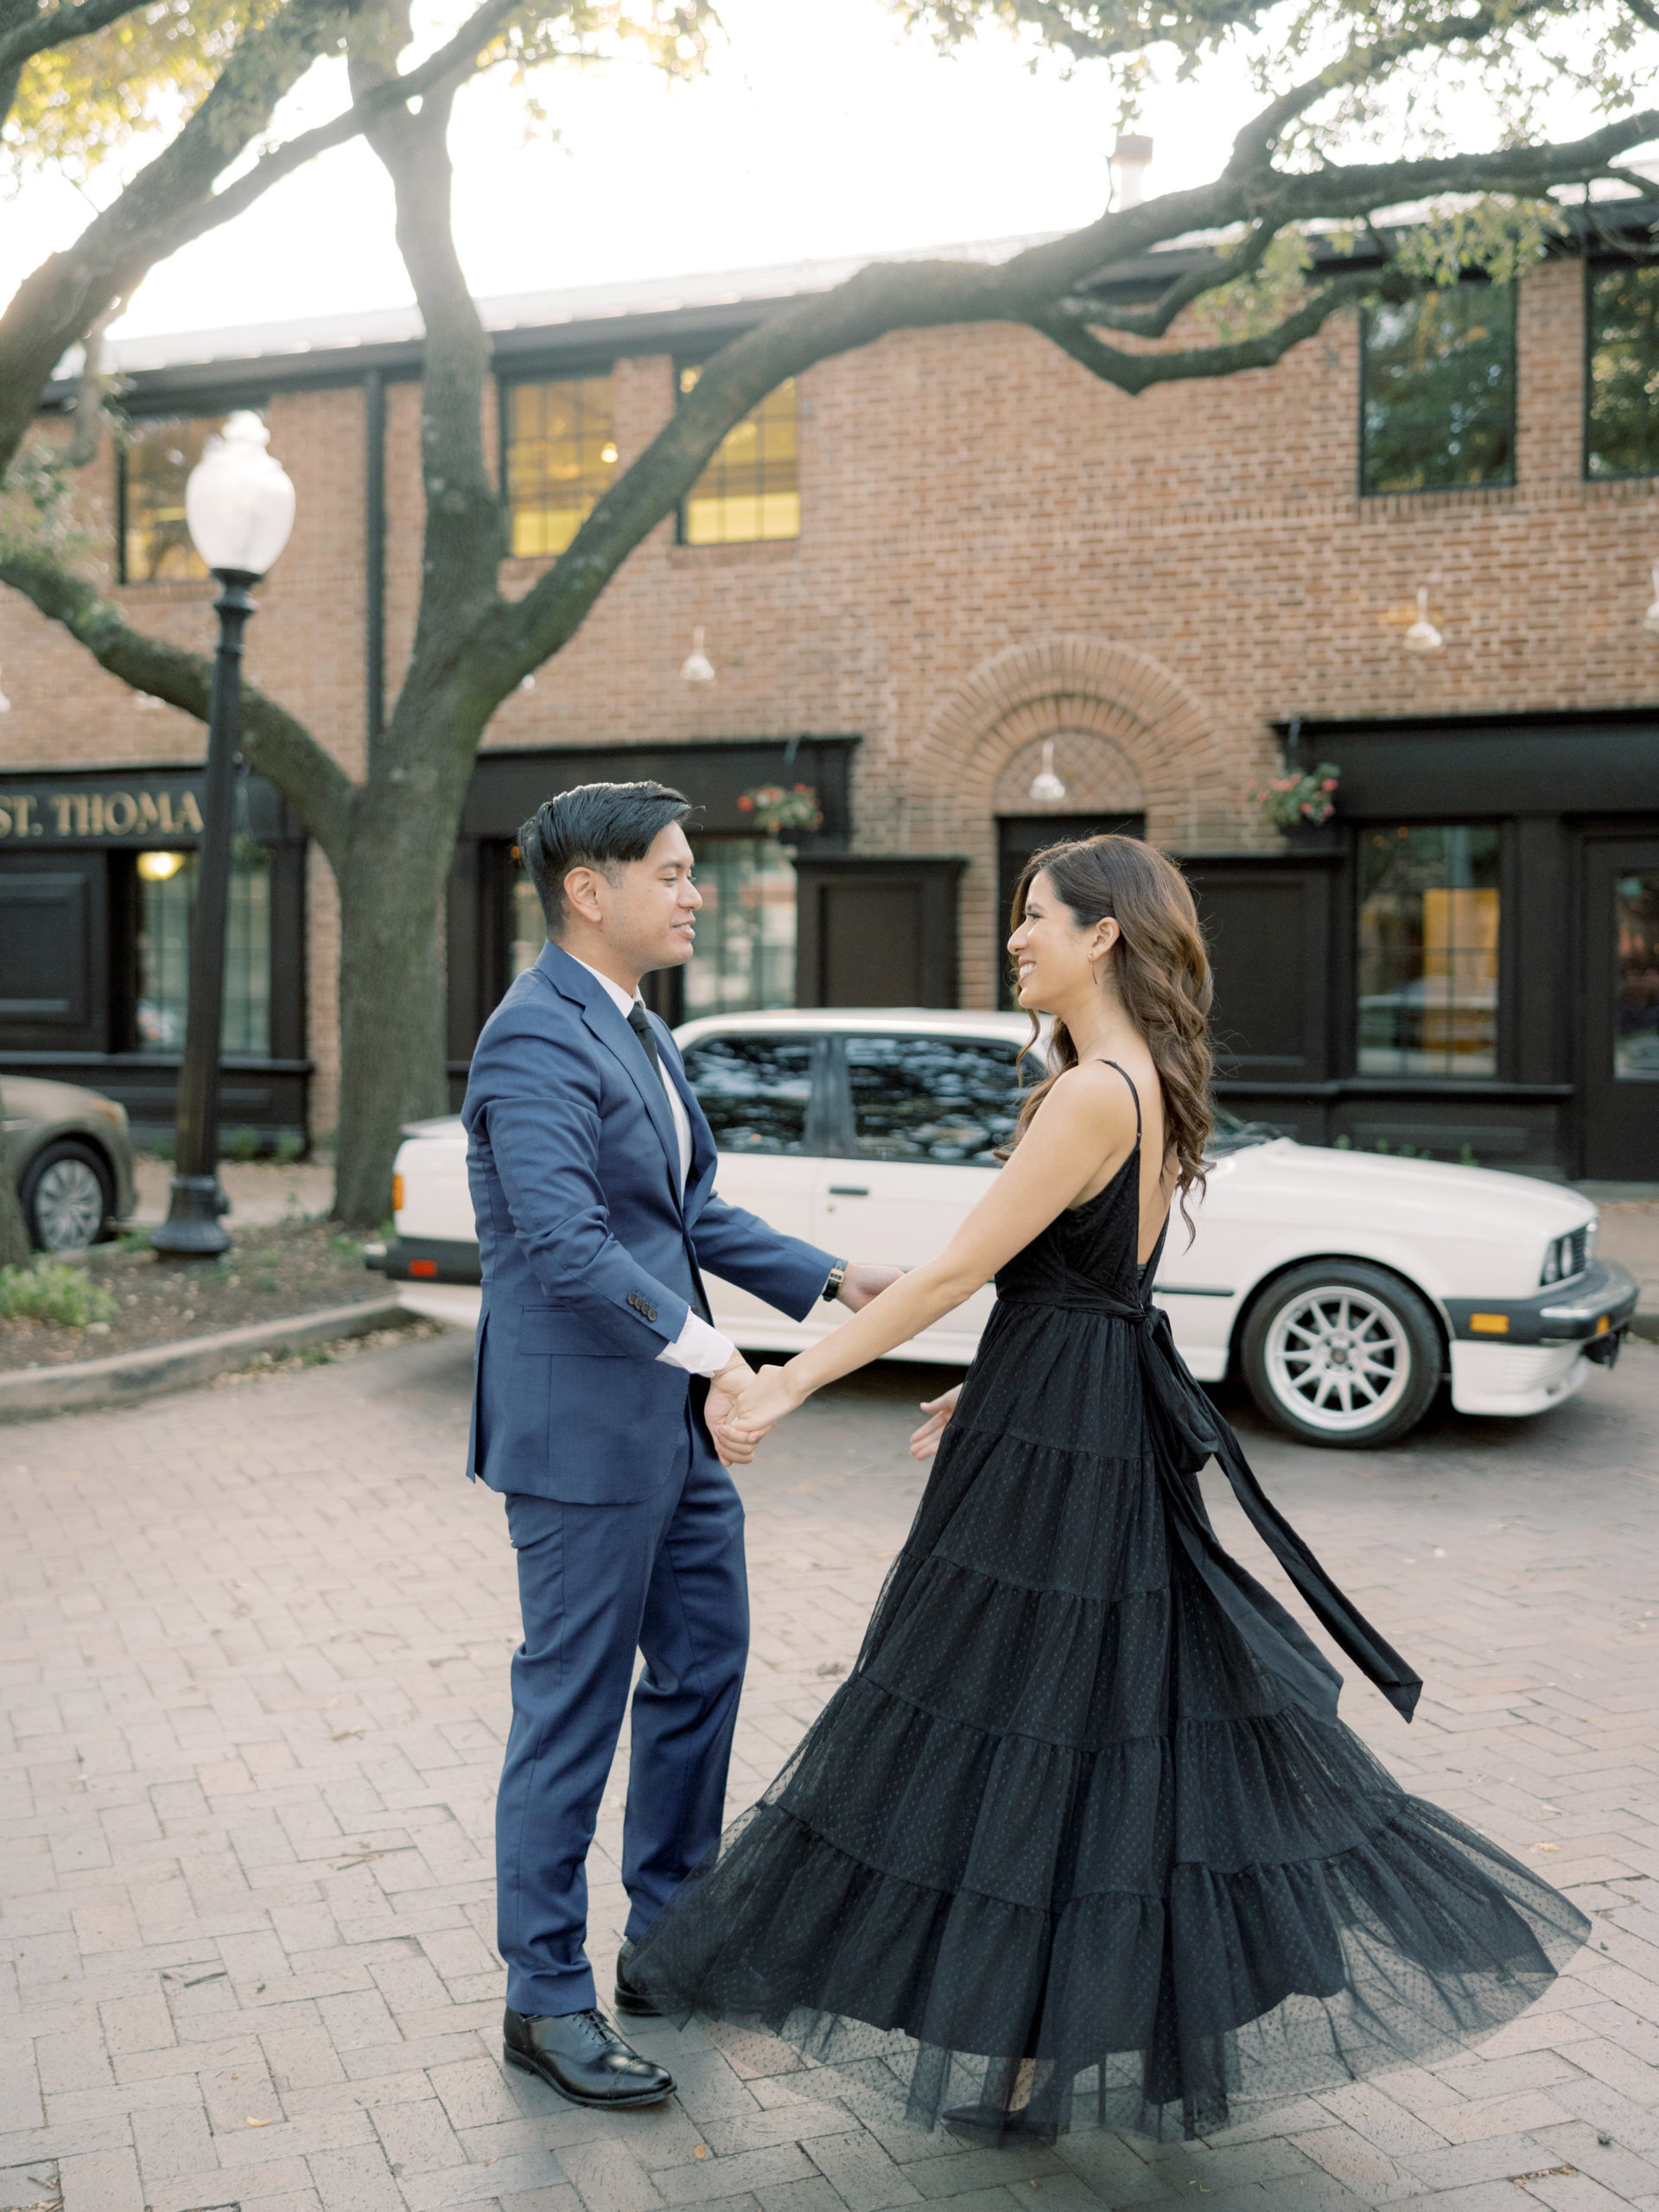 The engaged couple are holding hands while happily looking at each other in front of a red brick building. Engagement photos by Jenny Fu Studio 